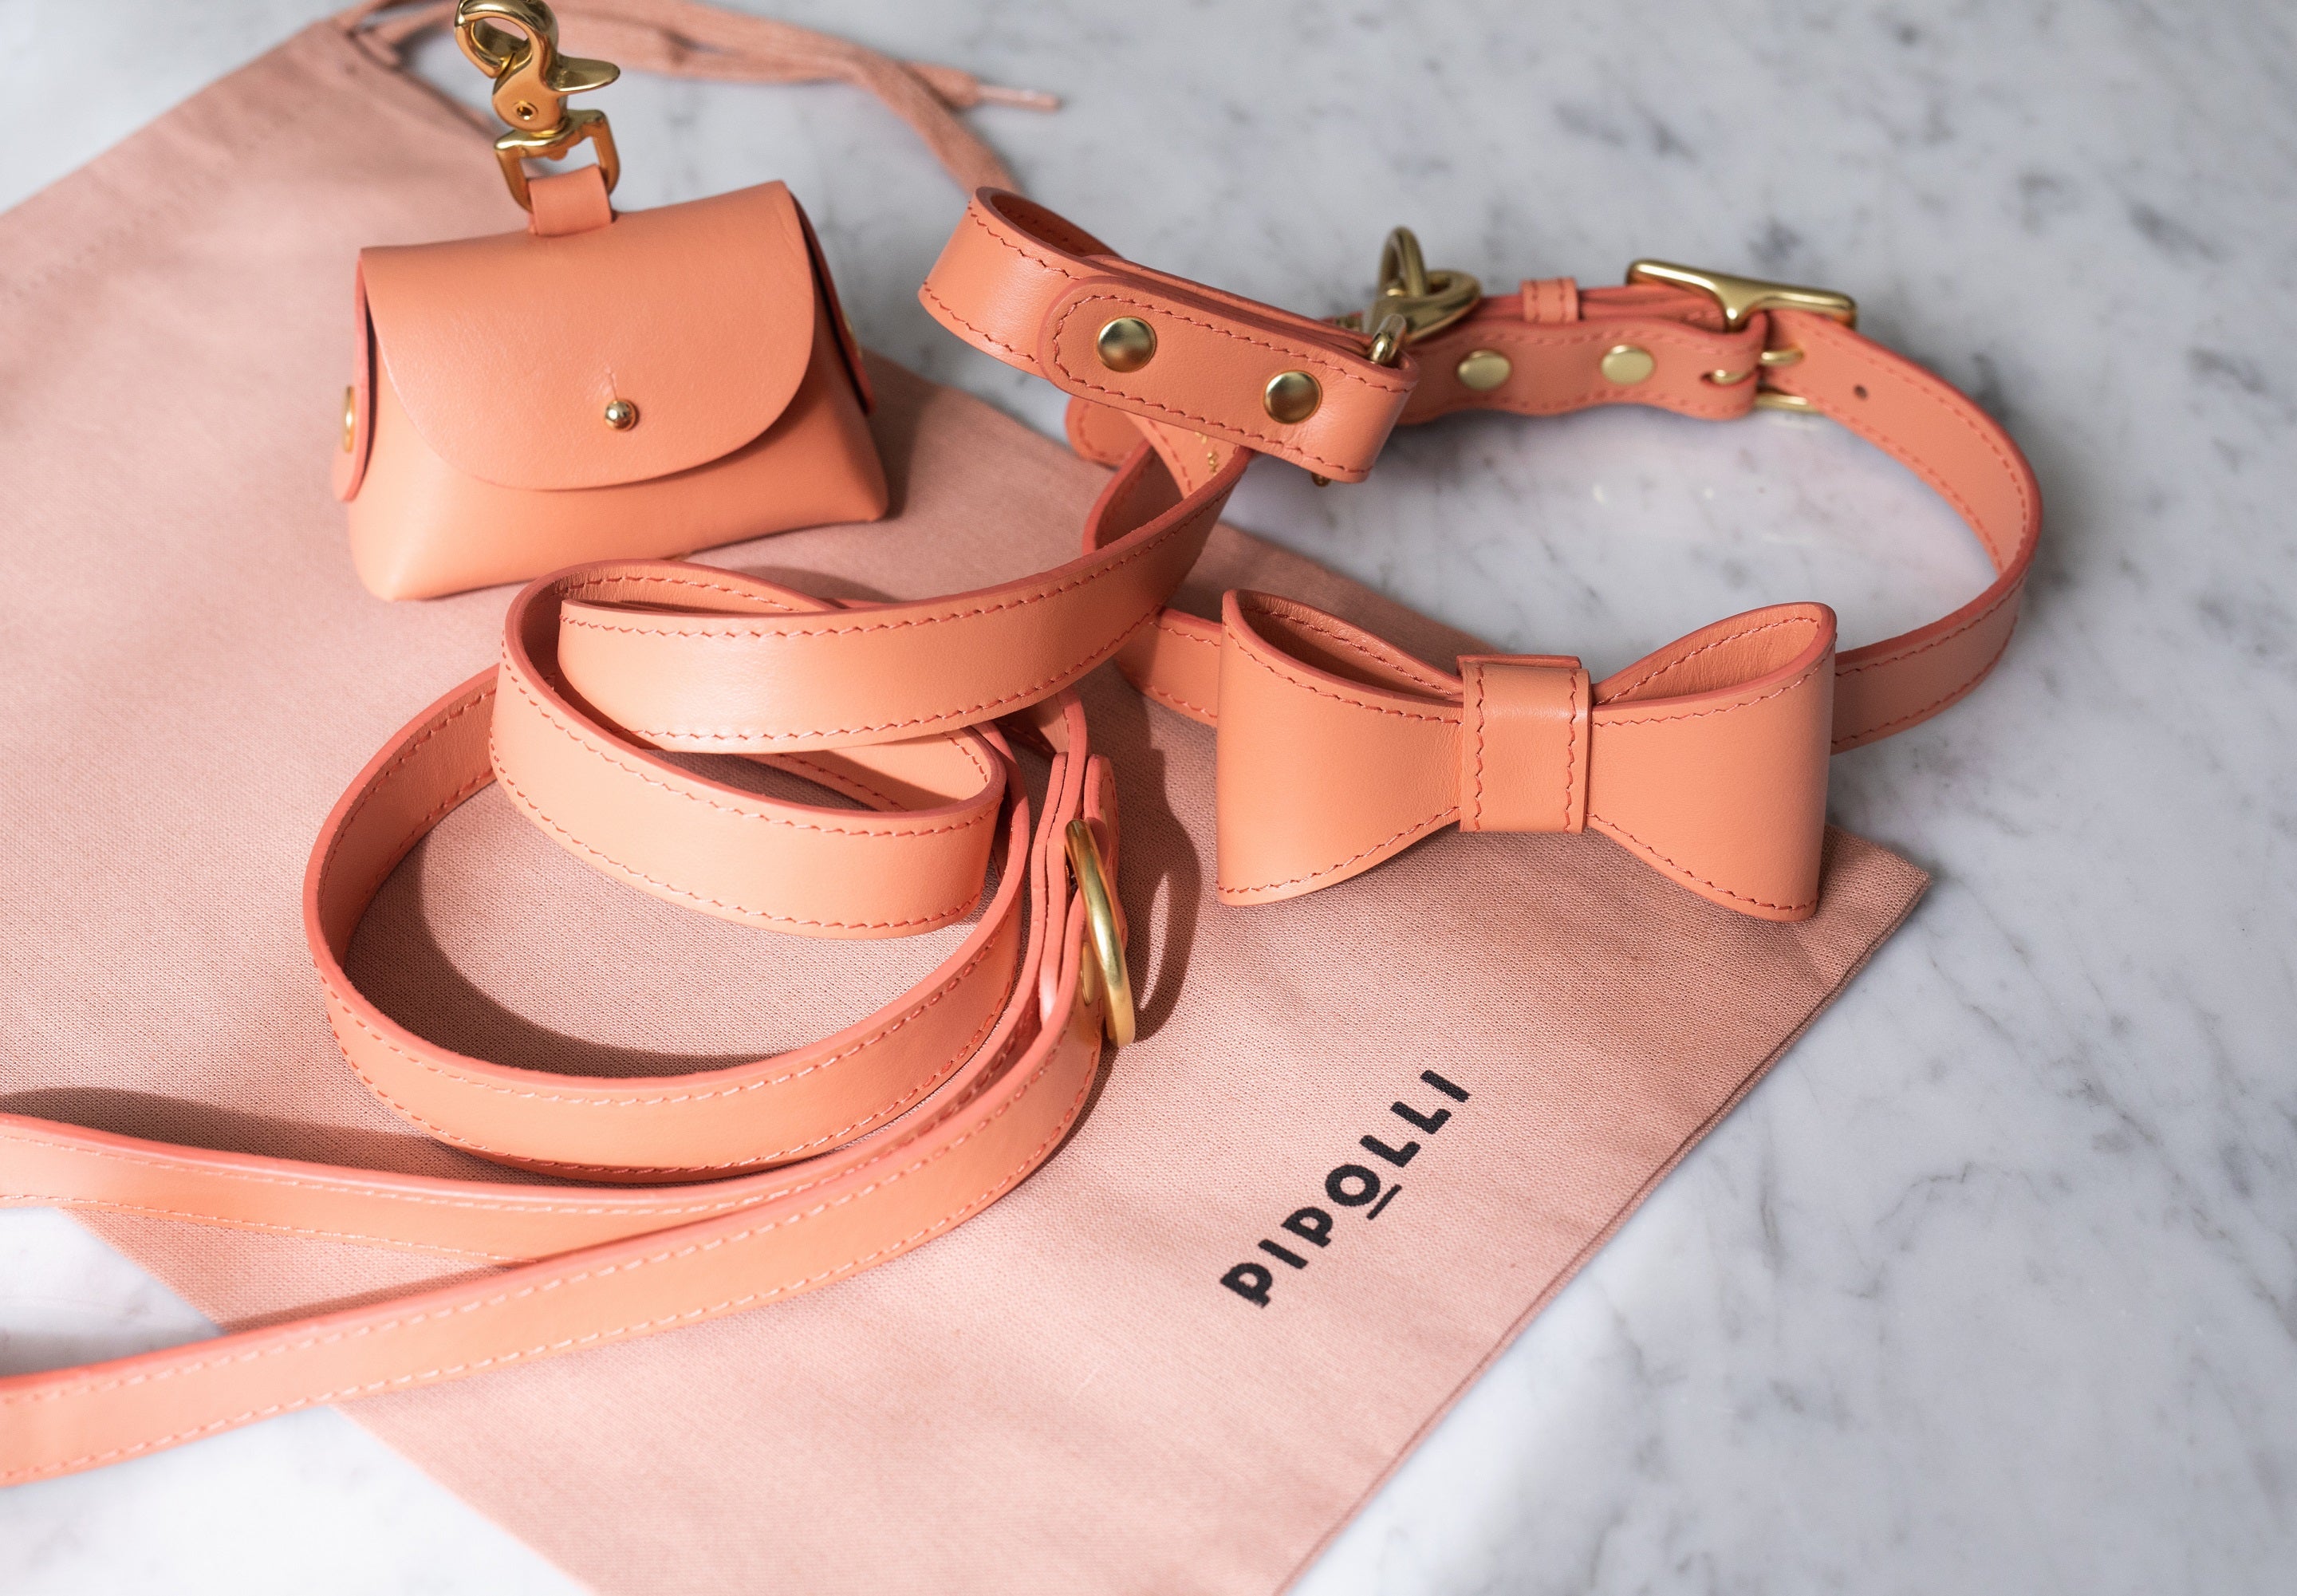 Peach leather collar with removable bow